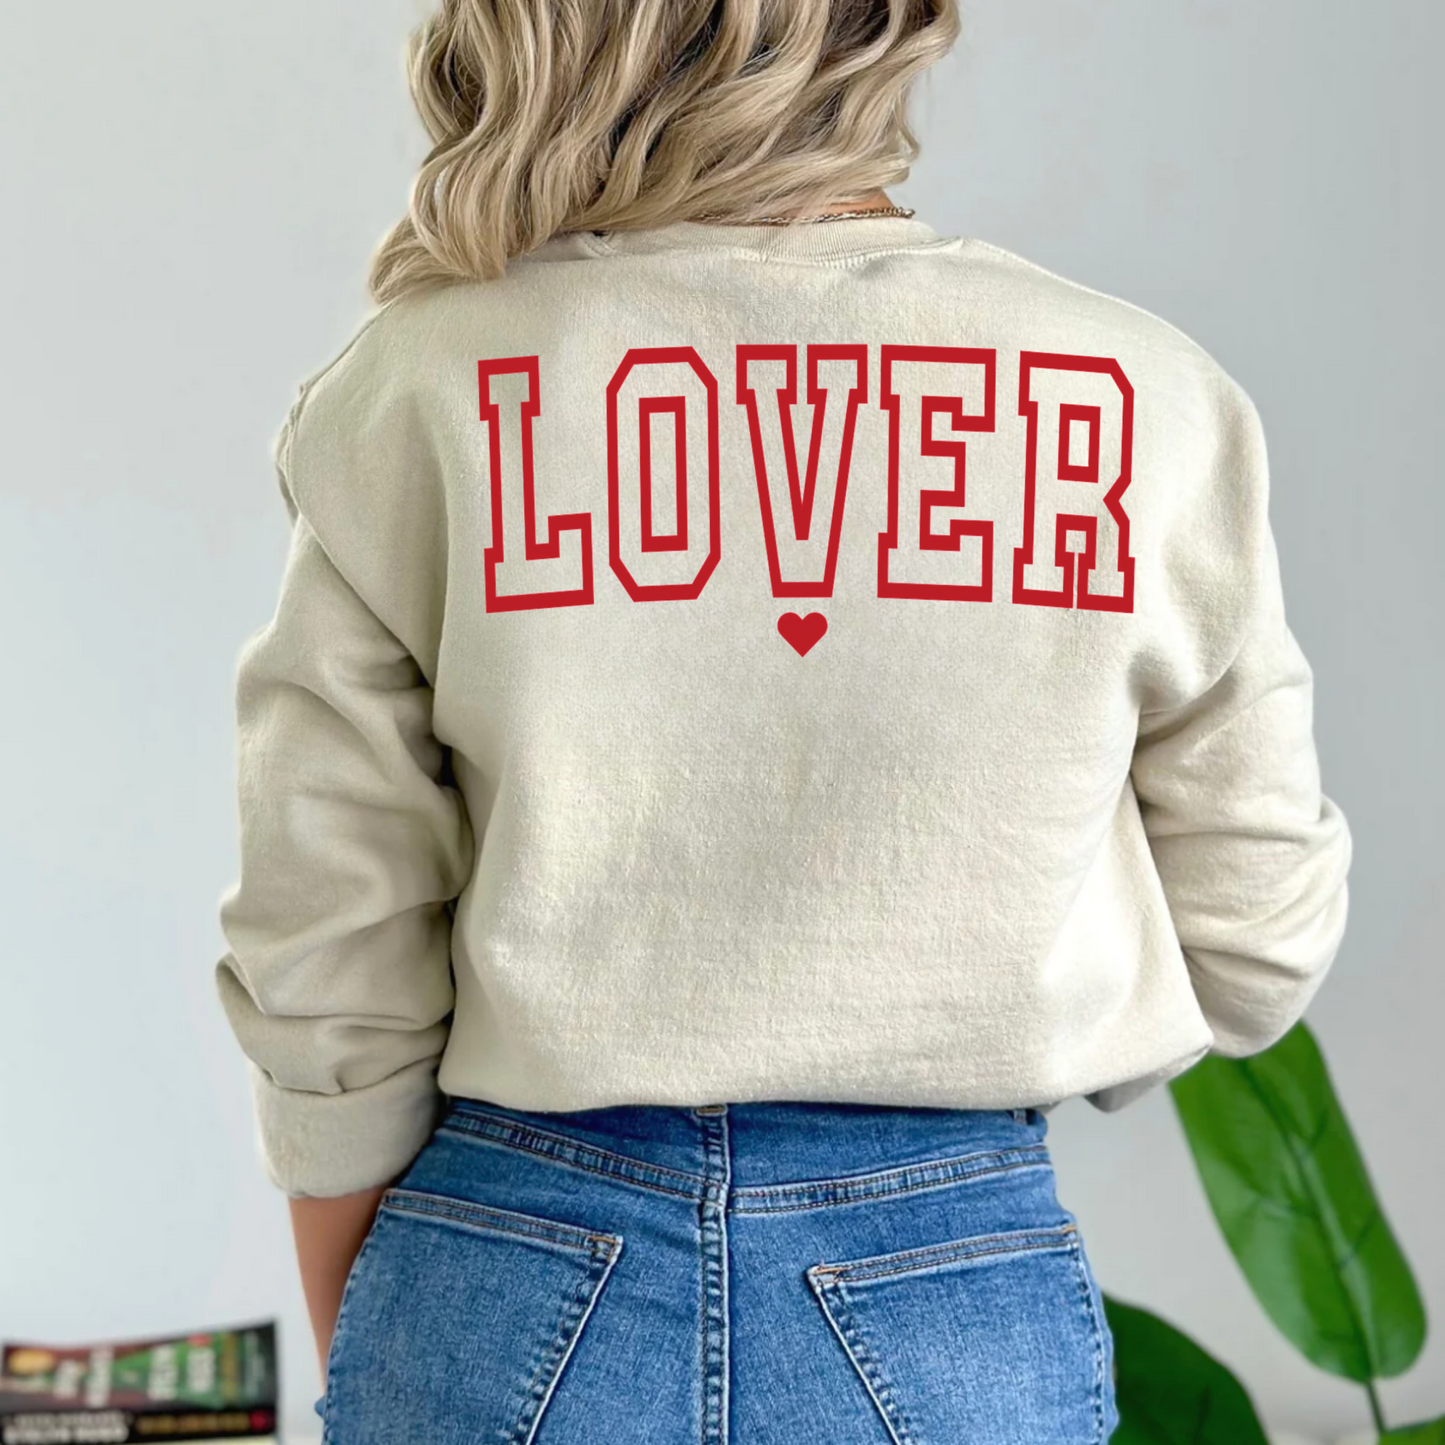 (shirt not included) LOVER in RED- Screen print Transfer